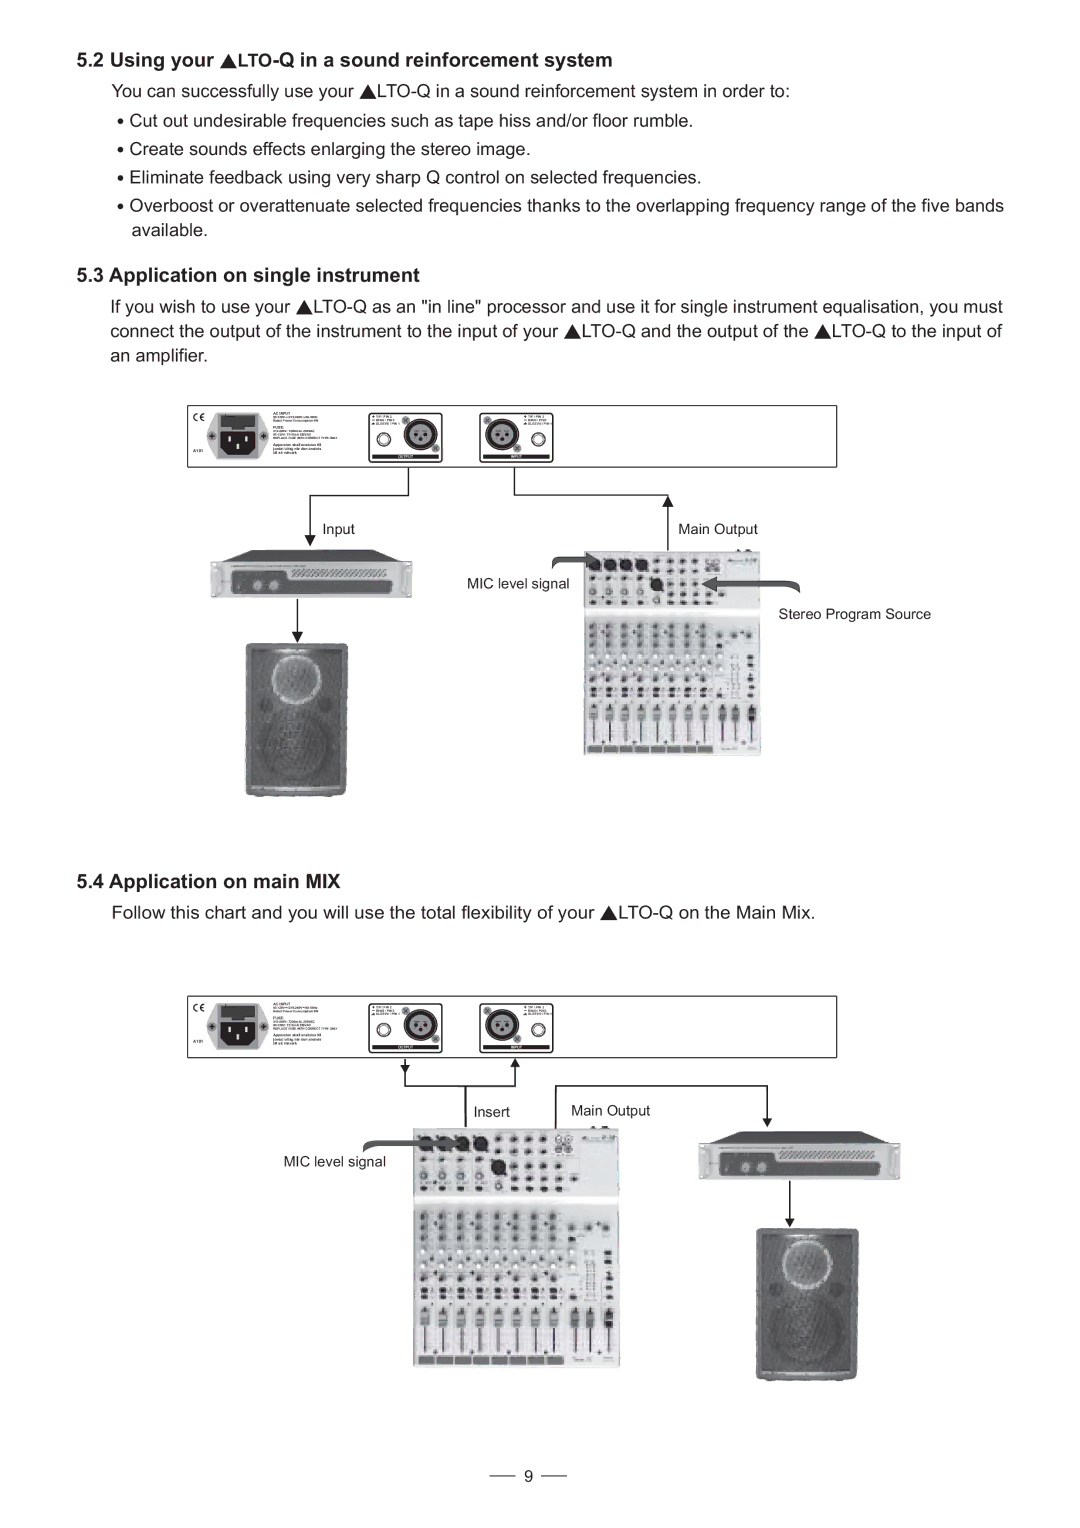 Nilfisk-ALTO ALTO Q user manual Using your LTO-Q in a sound reinforcement system, Application on single instrument 